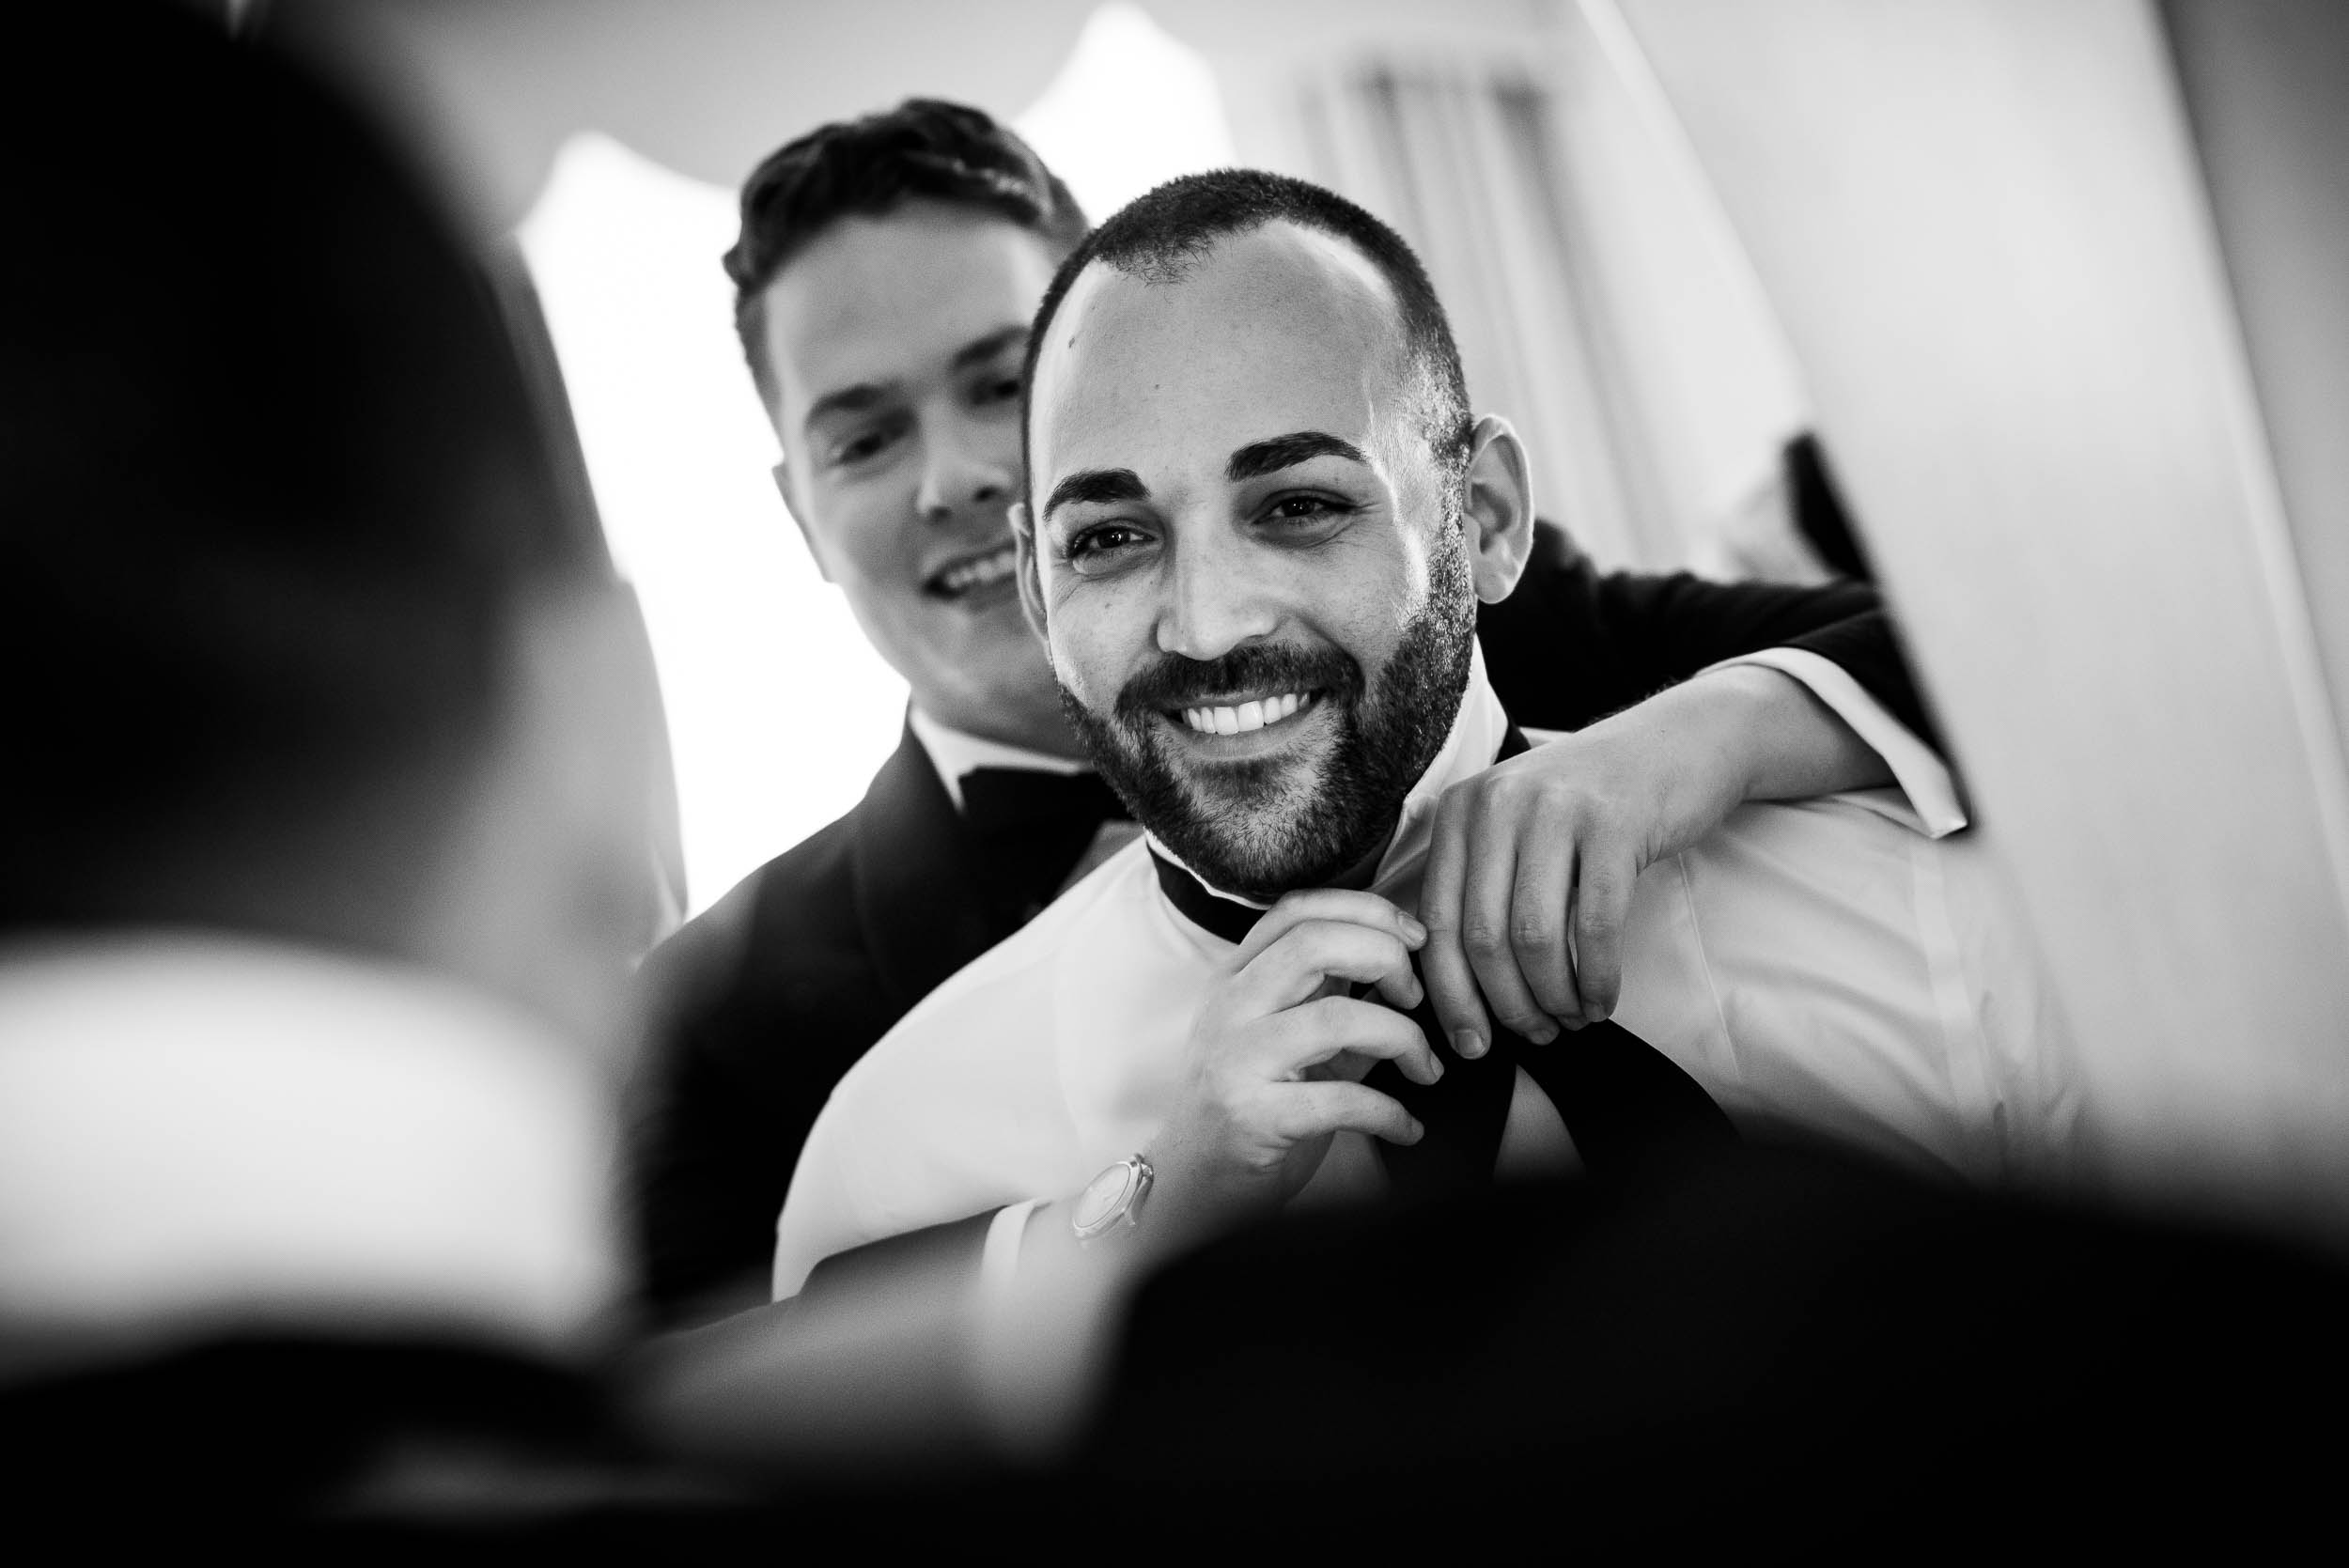 Grooms getting ready for luxurious fall wedding at the Chicago Symphony Center captured by J. Brown Photography. See more wedding ideas at jbrownphotography.com!